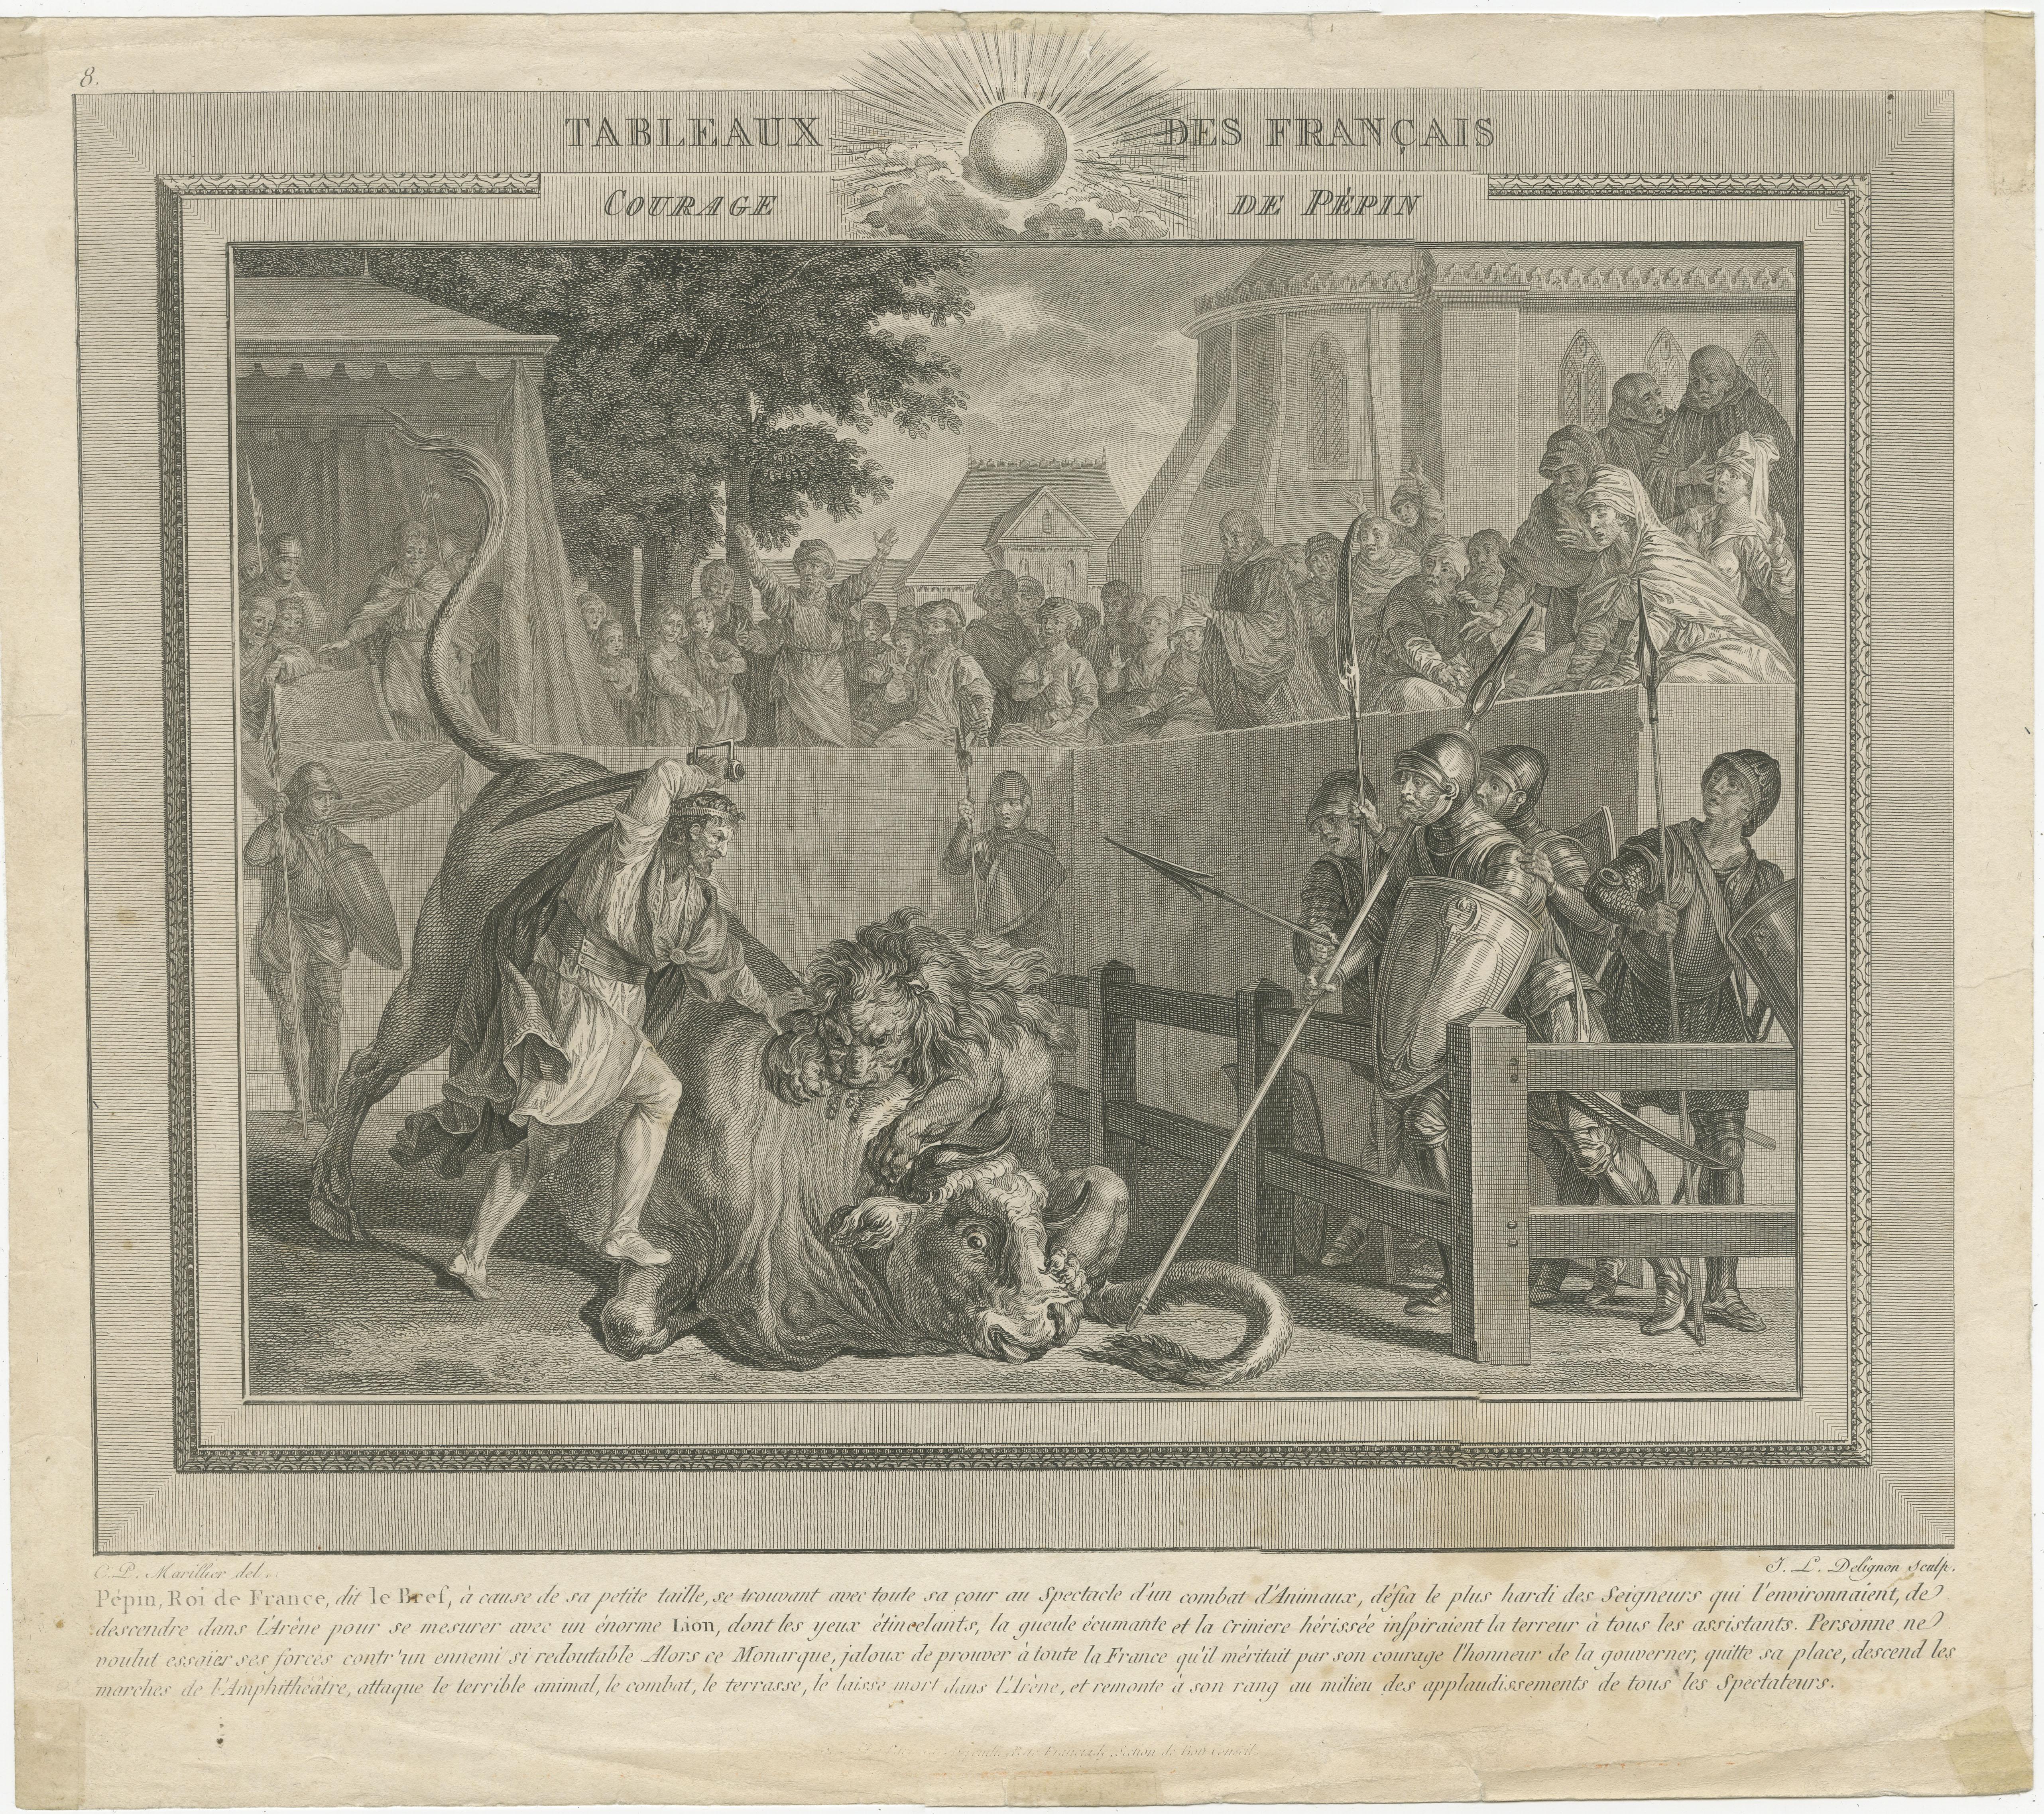 Antique print titled 'Tableaux des Francais - Courage de Pépin'. Original old print of the bravery of Pepin the Short, first king of the Franks. Pepin jumps into the arena during a fight between a lion and a bull. Set in a frame with a radiant sun